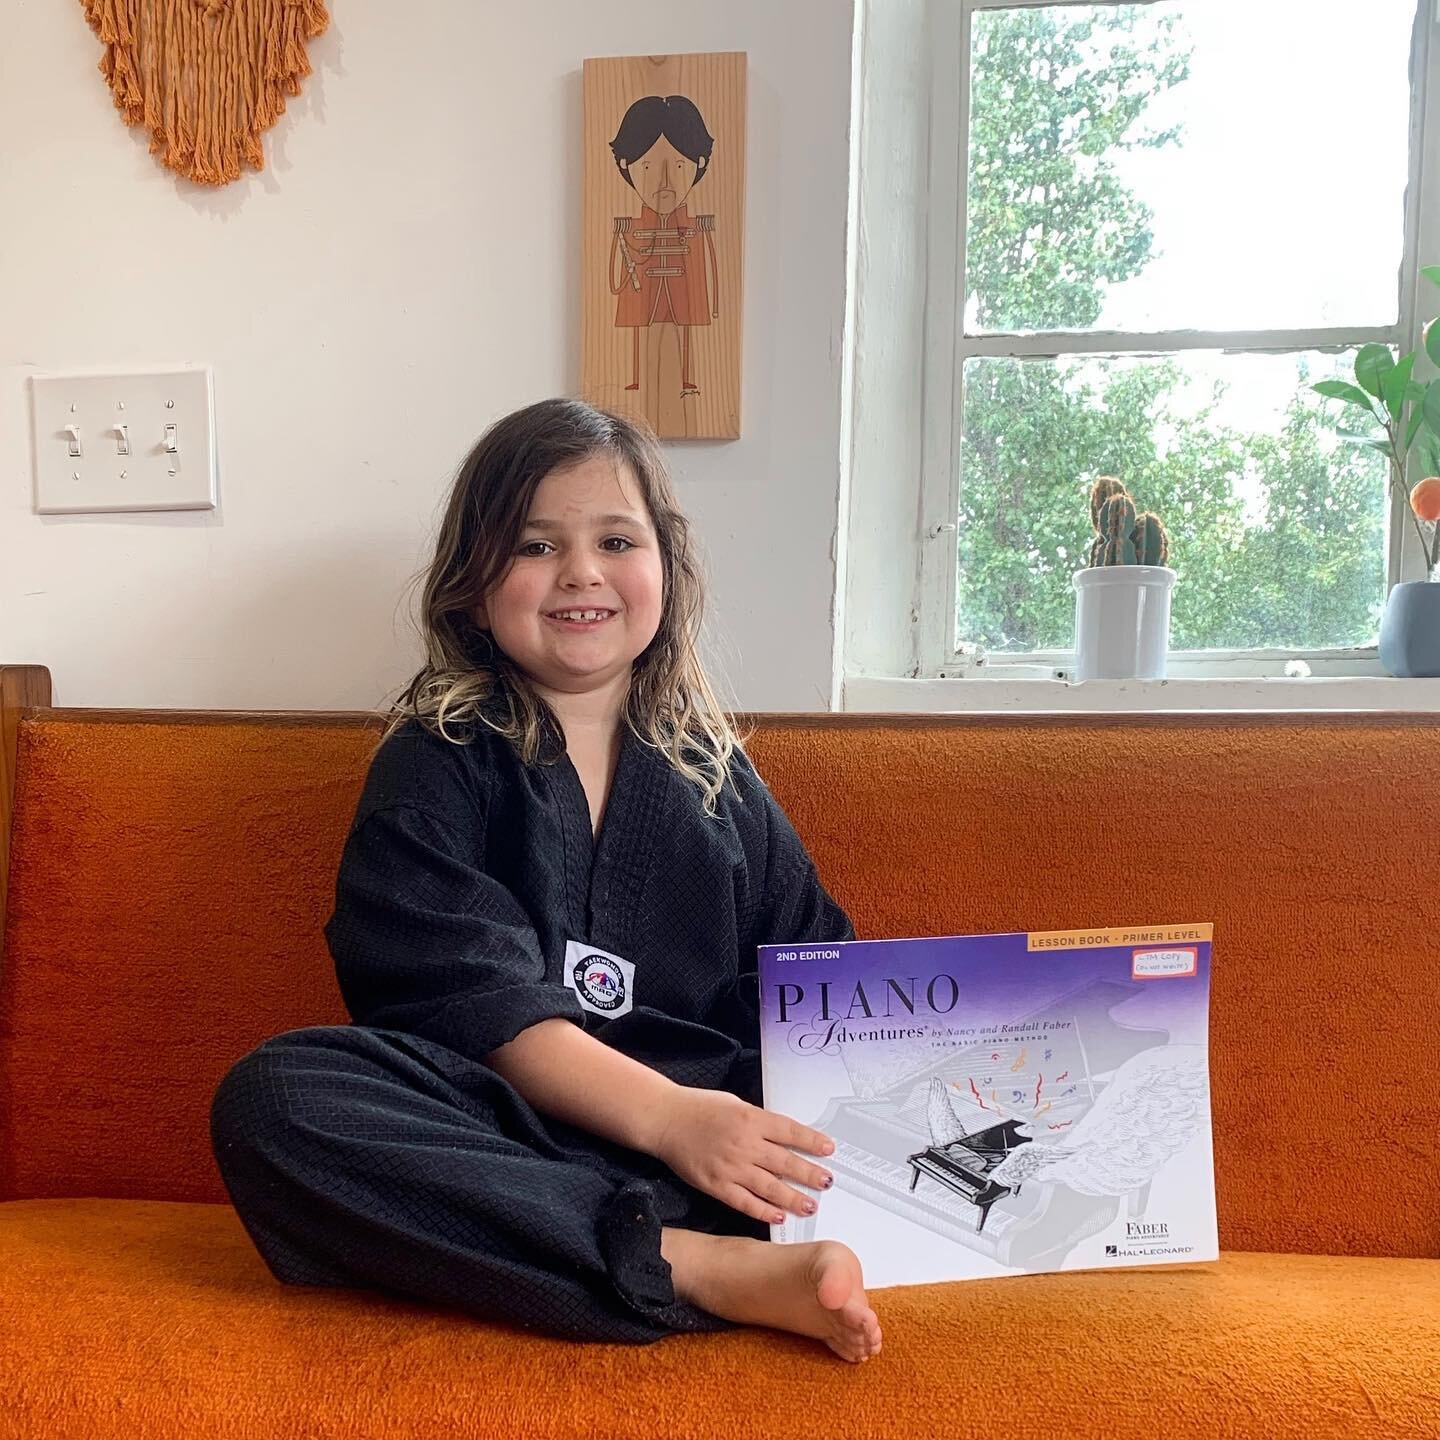 🎊 Congratulations to Eleanor (7) who just completed her primer piano book! Keep up the great work!